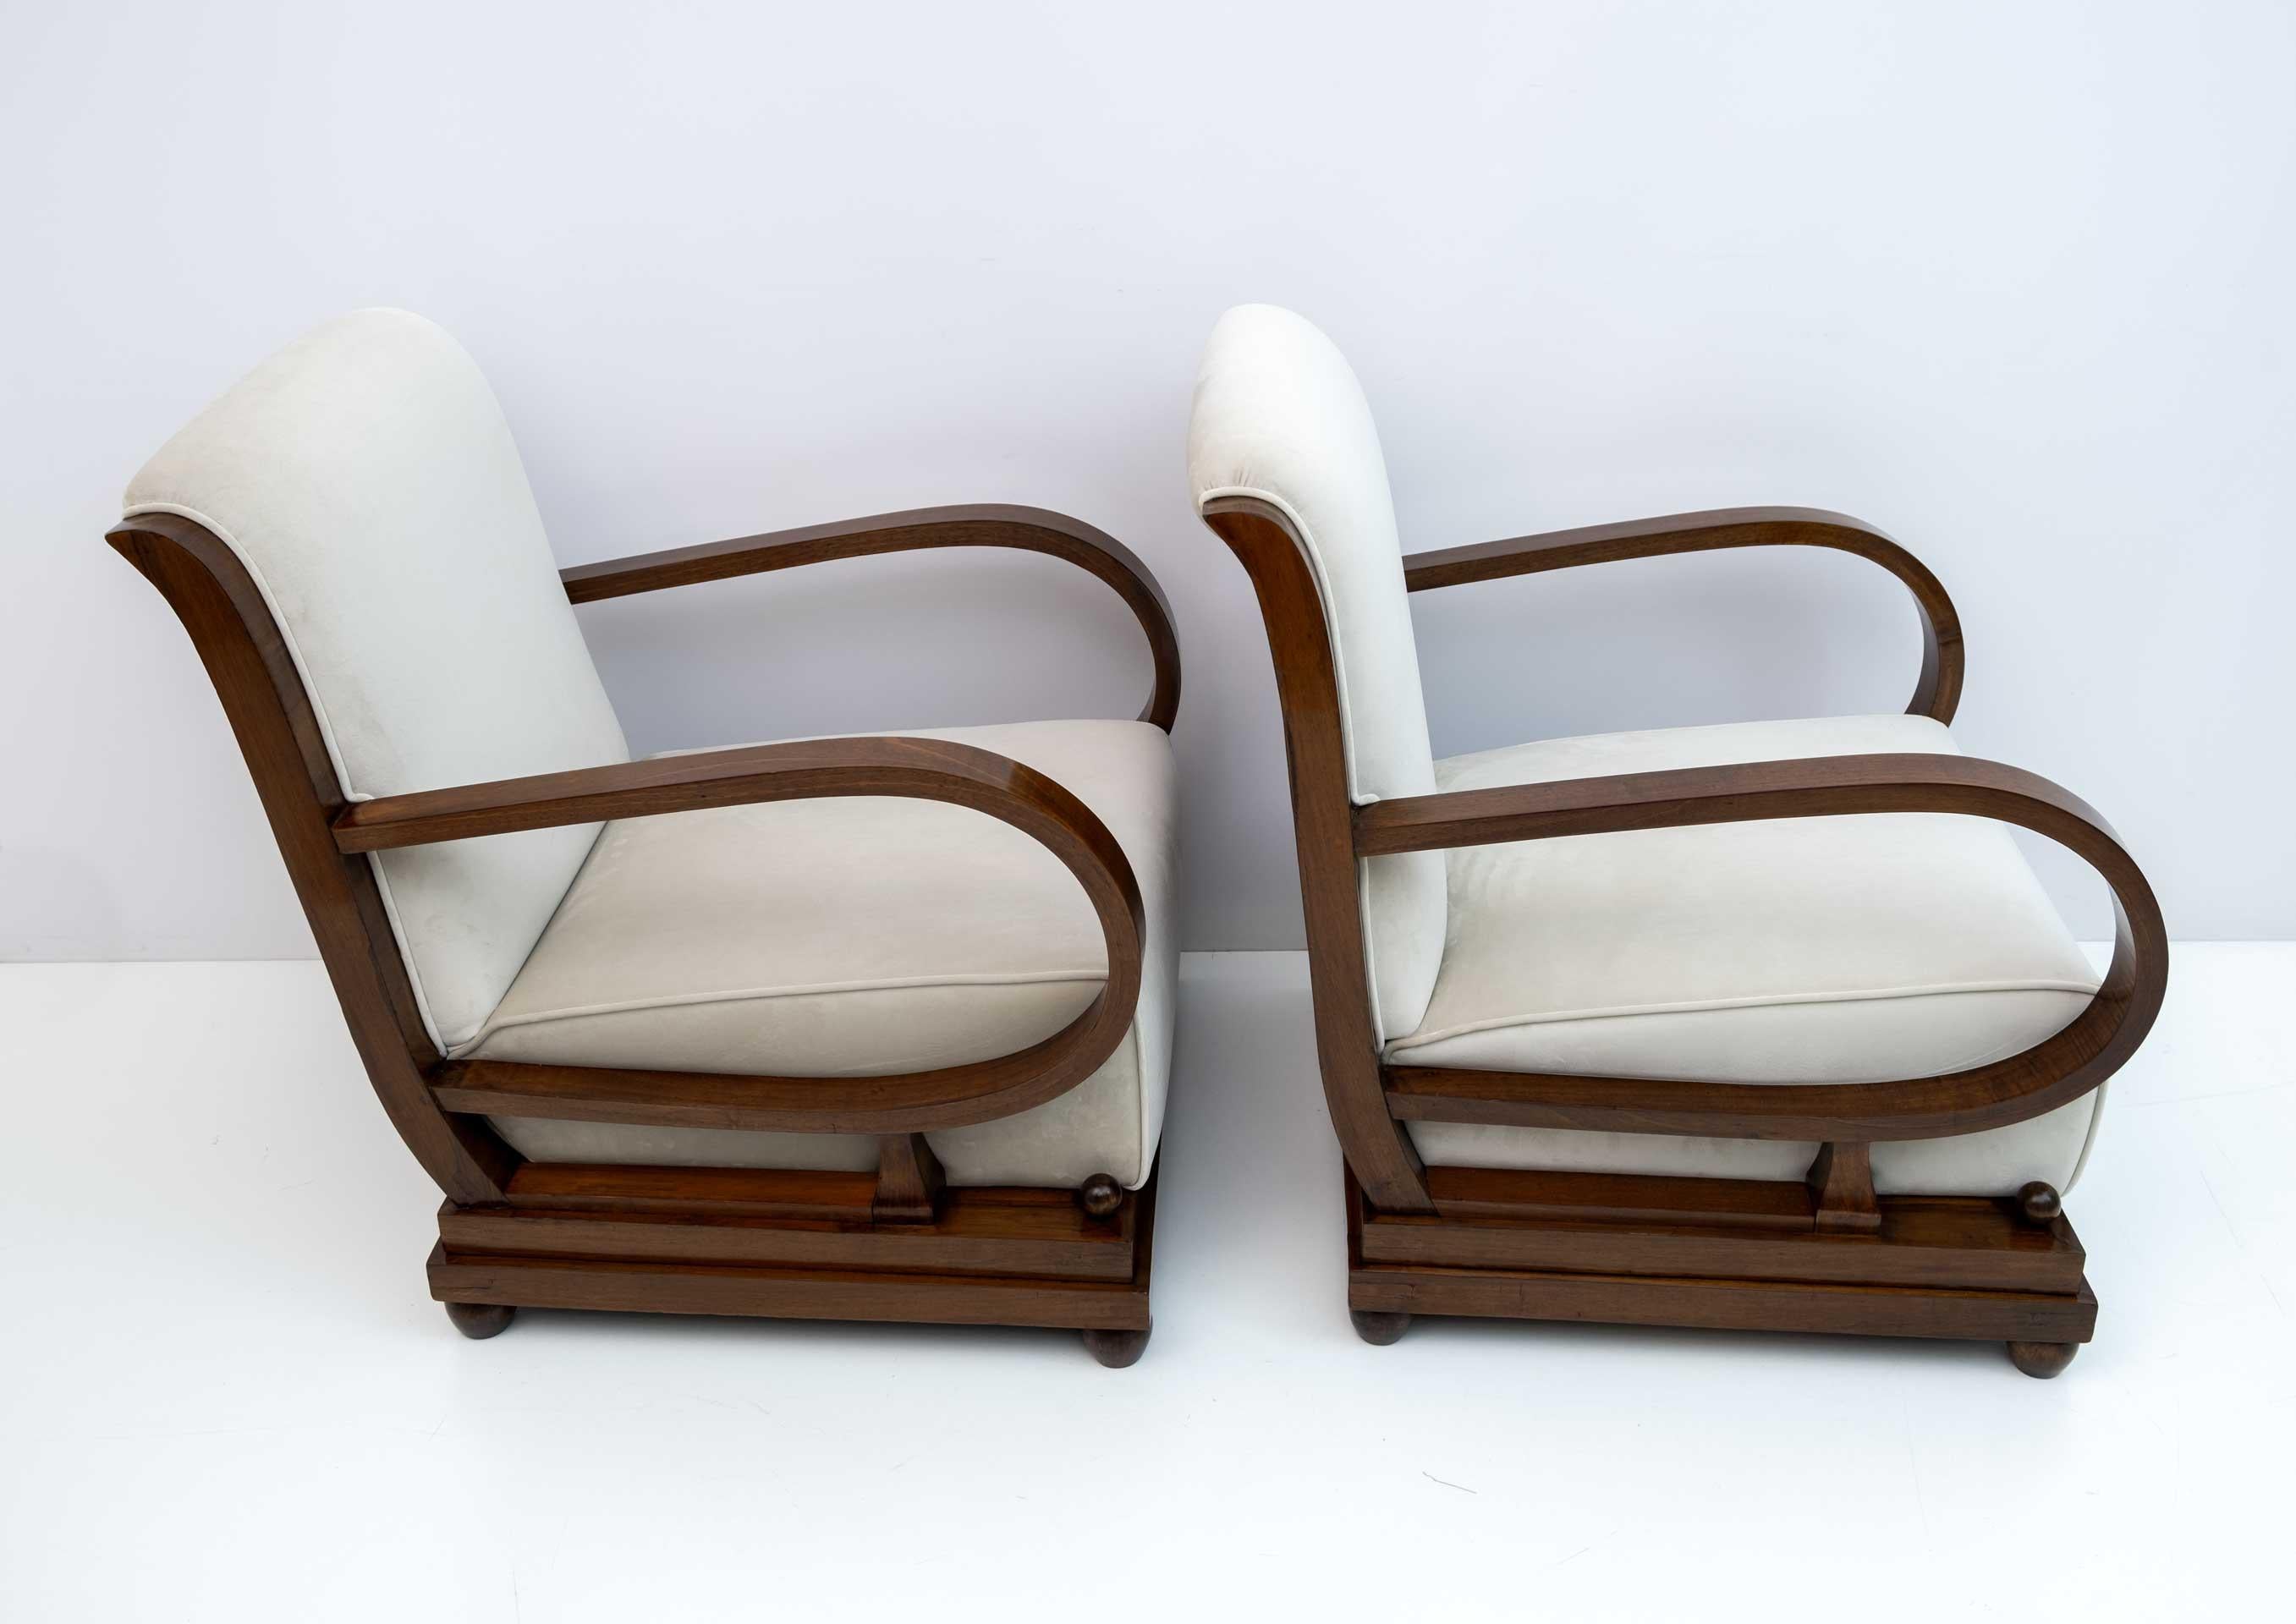 Pair of Art Dèco Italian Walnut and Velvet Armchairs and Two Ottomans, 1920s For Sale 1